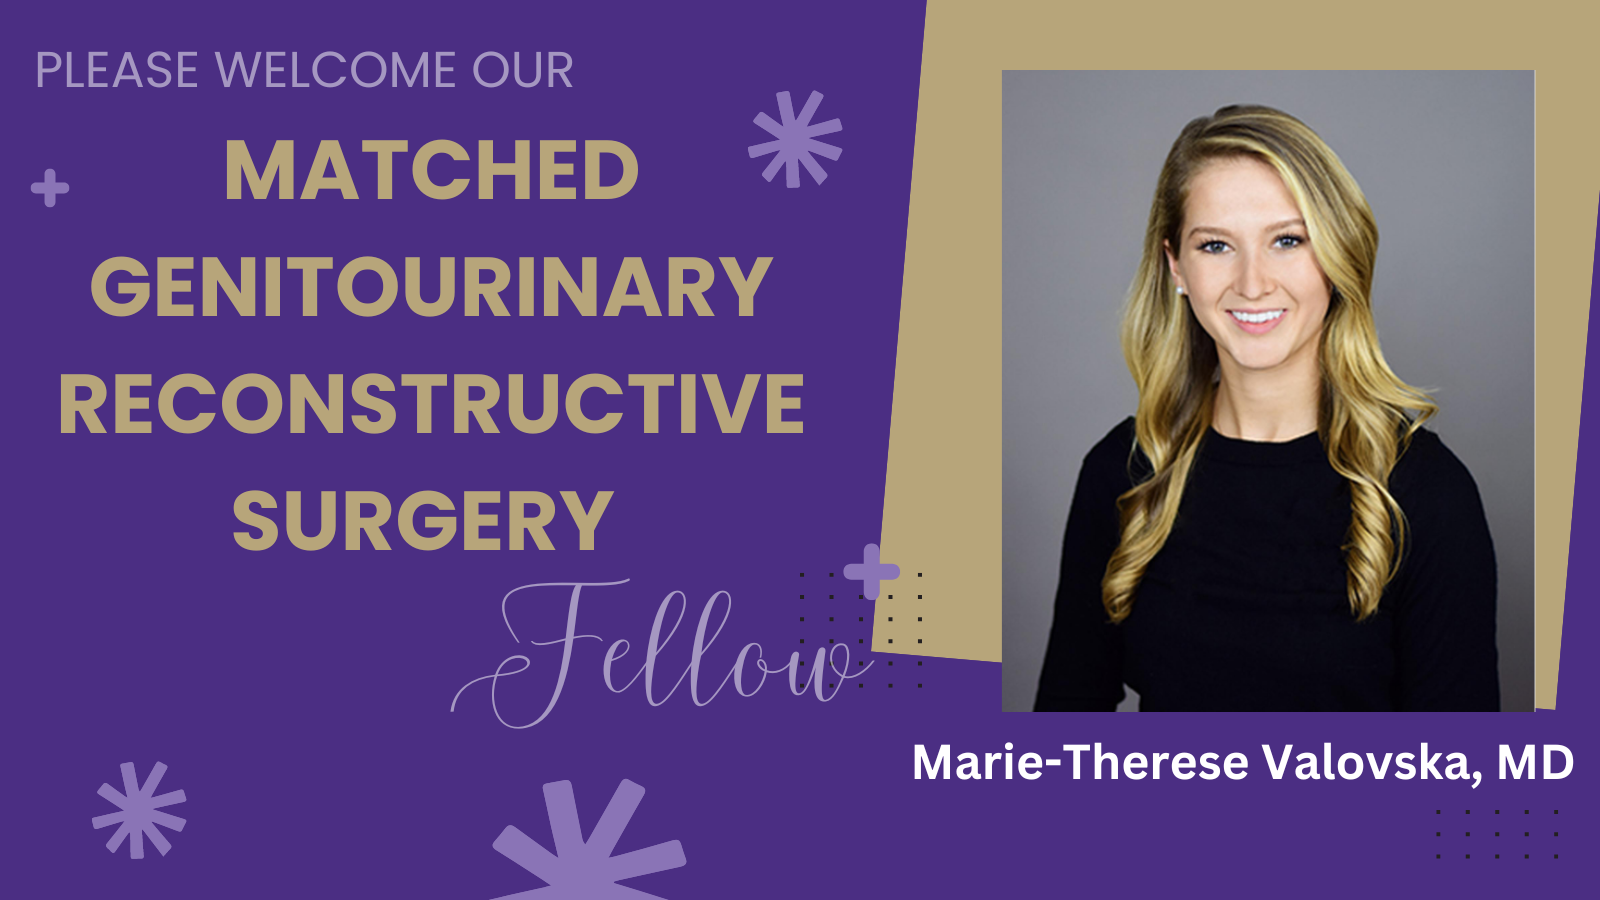 Genitourinary-Reconstructive-Surgery-match-graphic